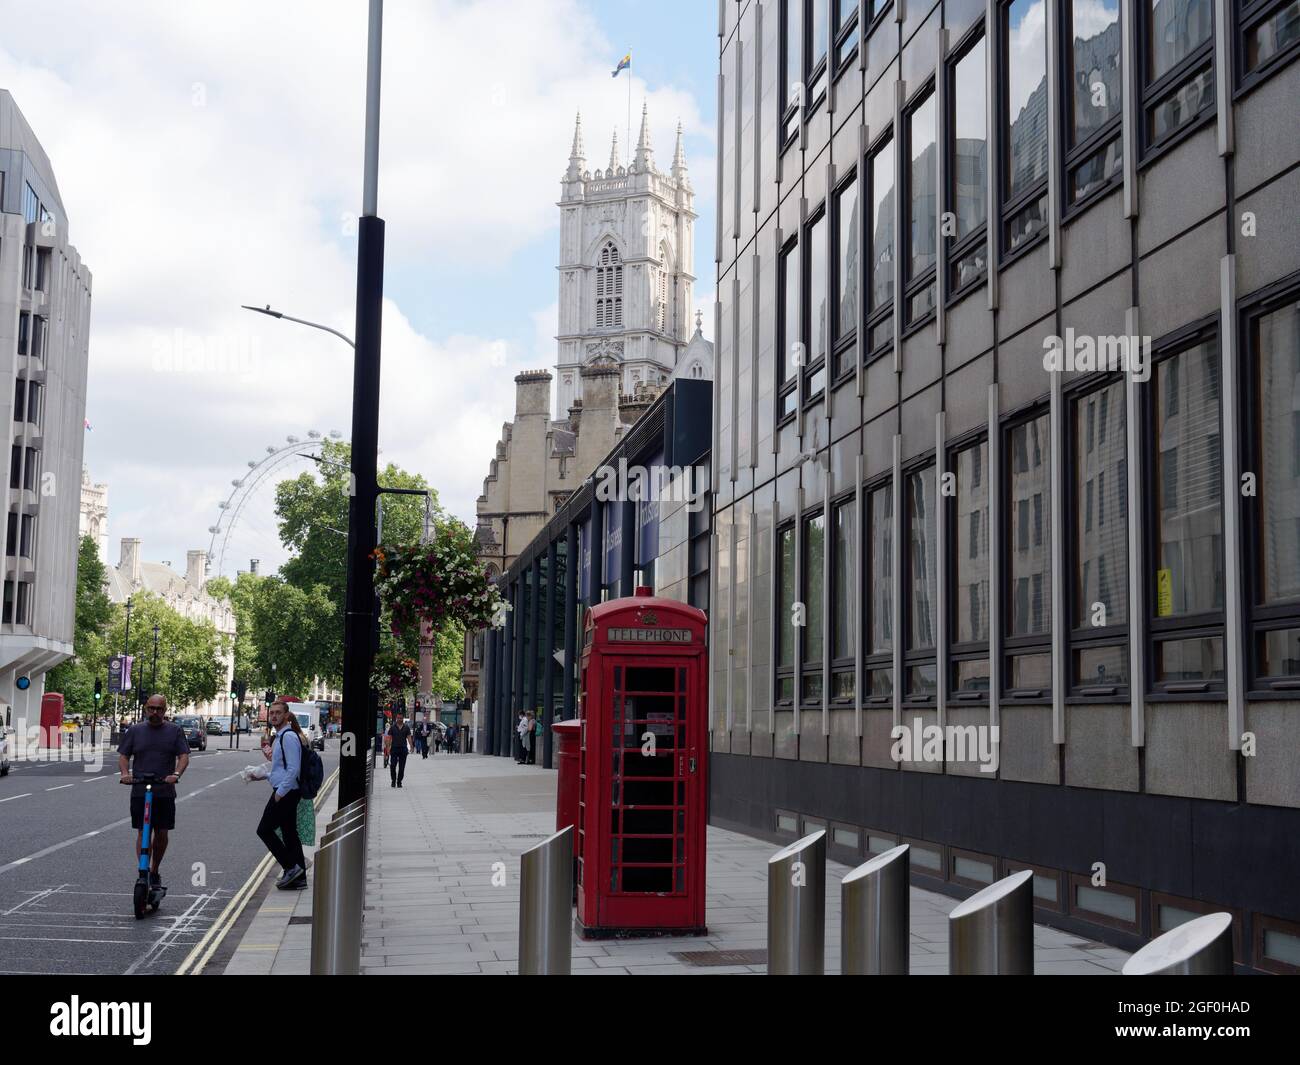 London, Greater London, England, August 10 2021: Victoria Street. The London Eye and a tower of Westminster Abbey behind. Stock Photo